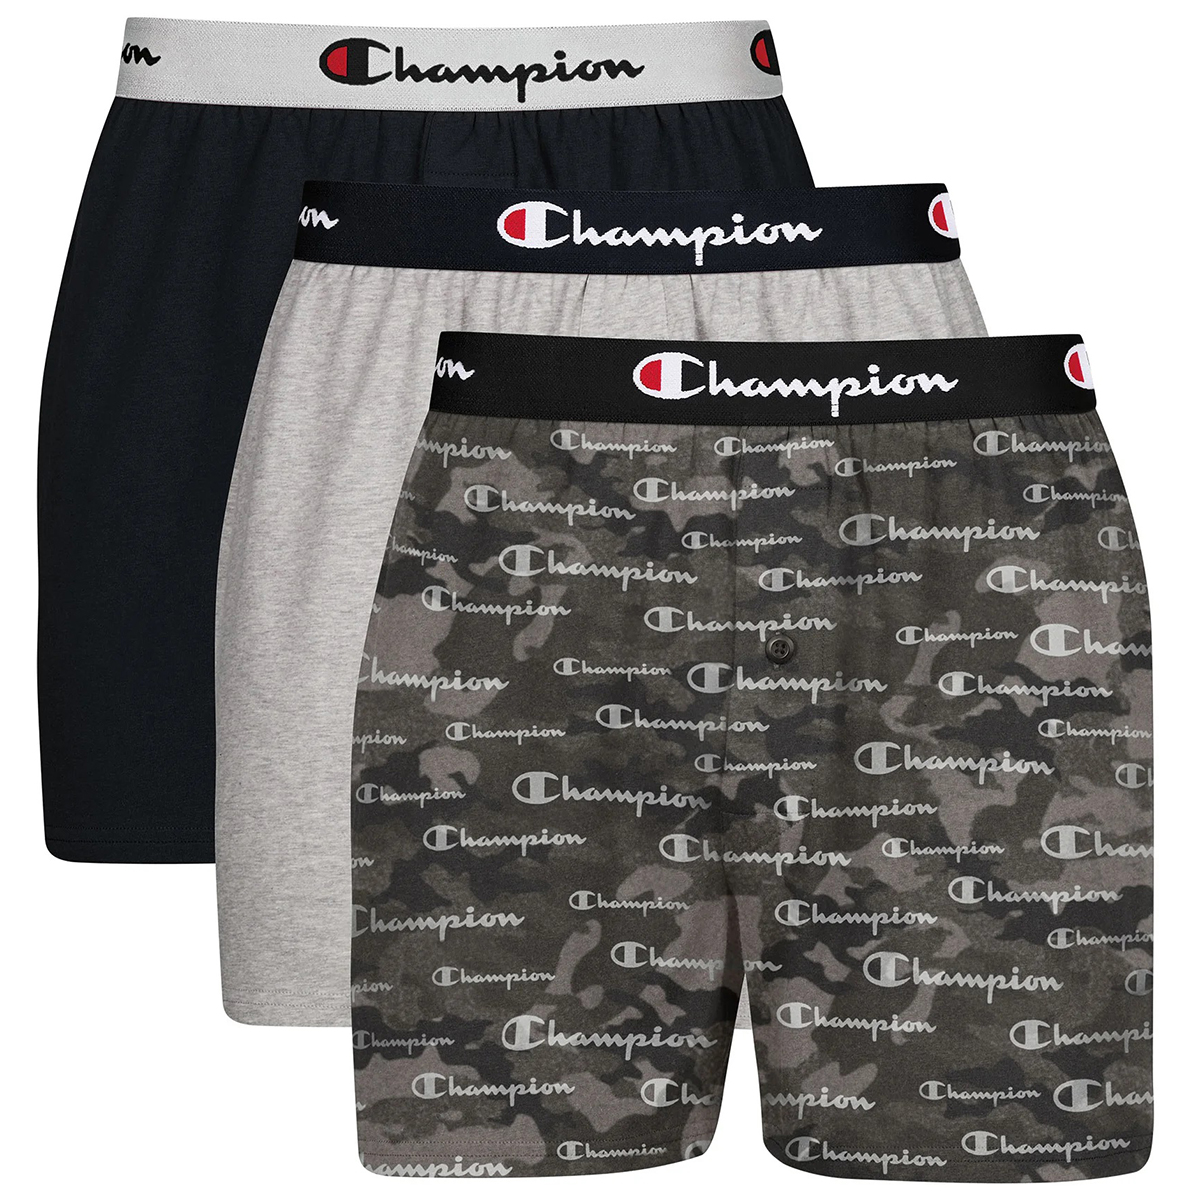 Champion Men's Everyday Cotton Stretch Boxers, 3 Pairs